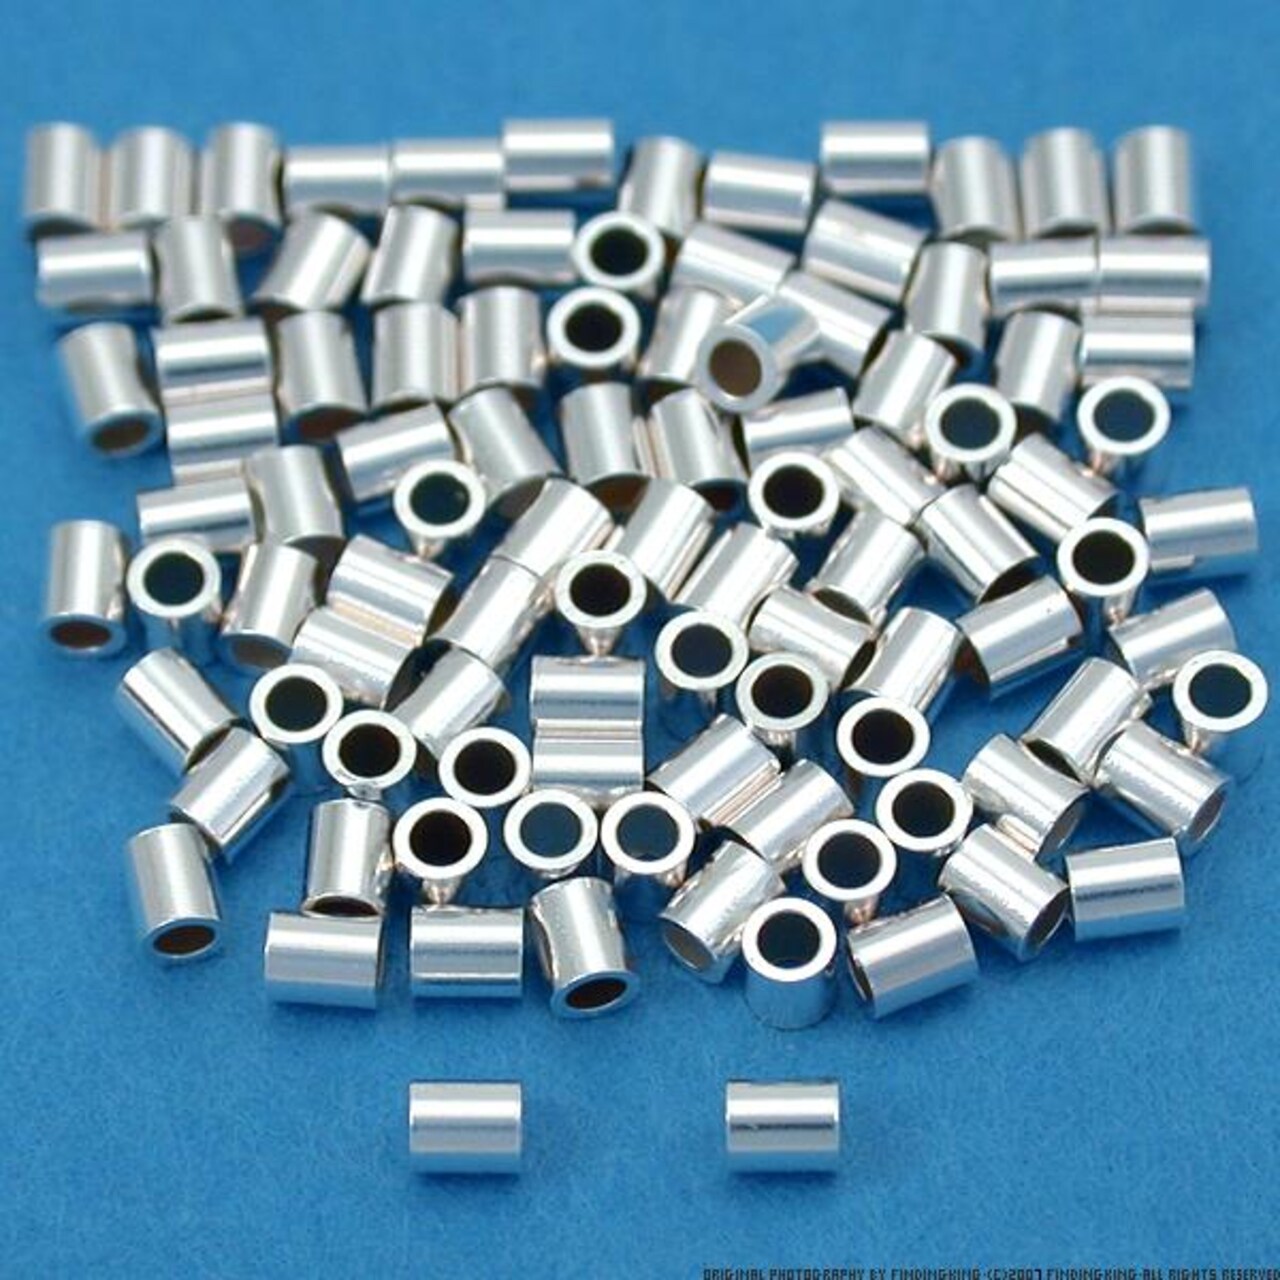 100 Sterling Silver Crimp Beads Micro Beading 1.5mmx2mm